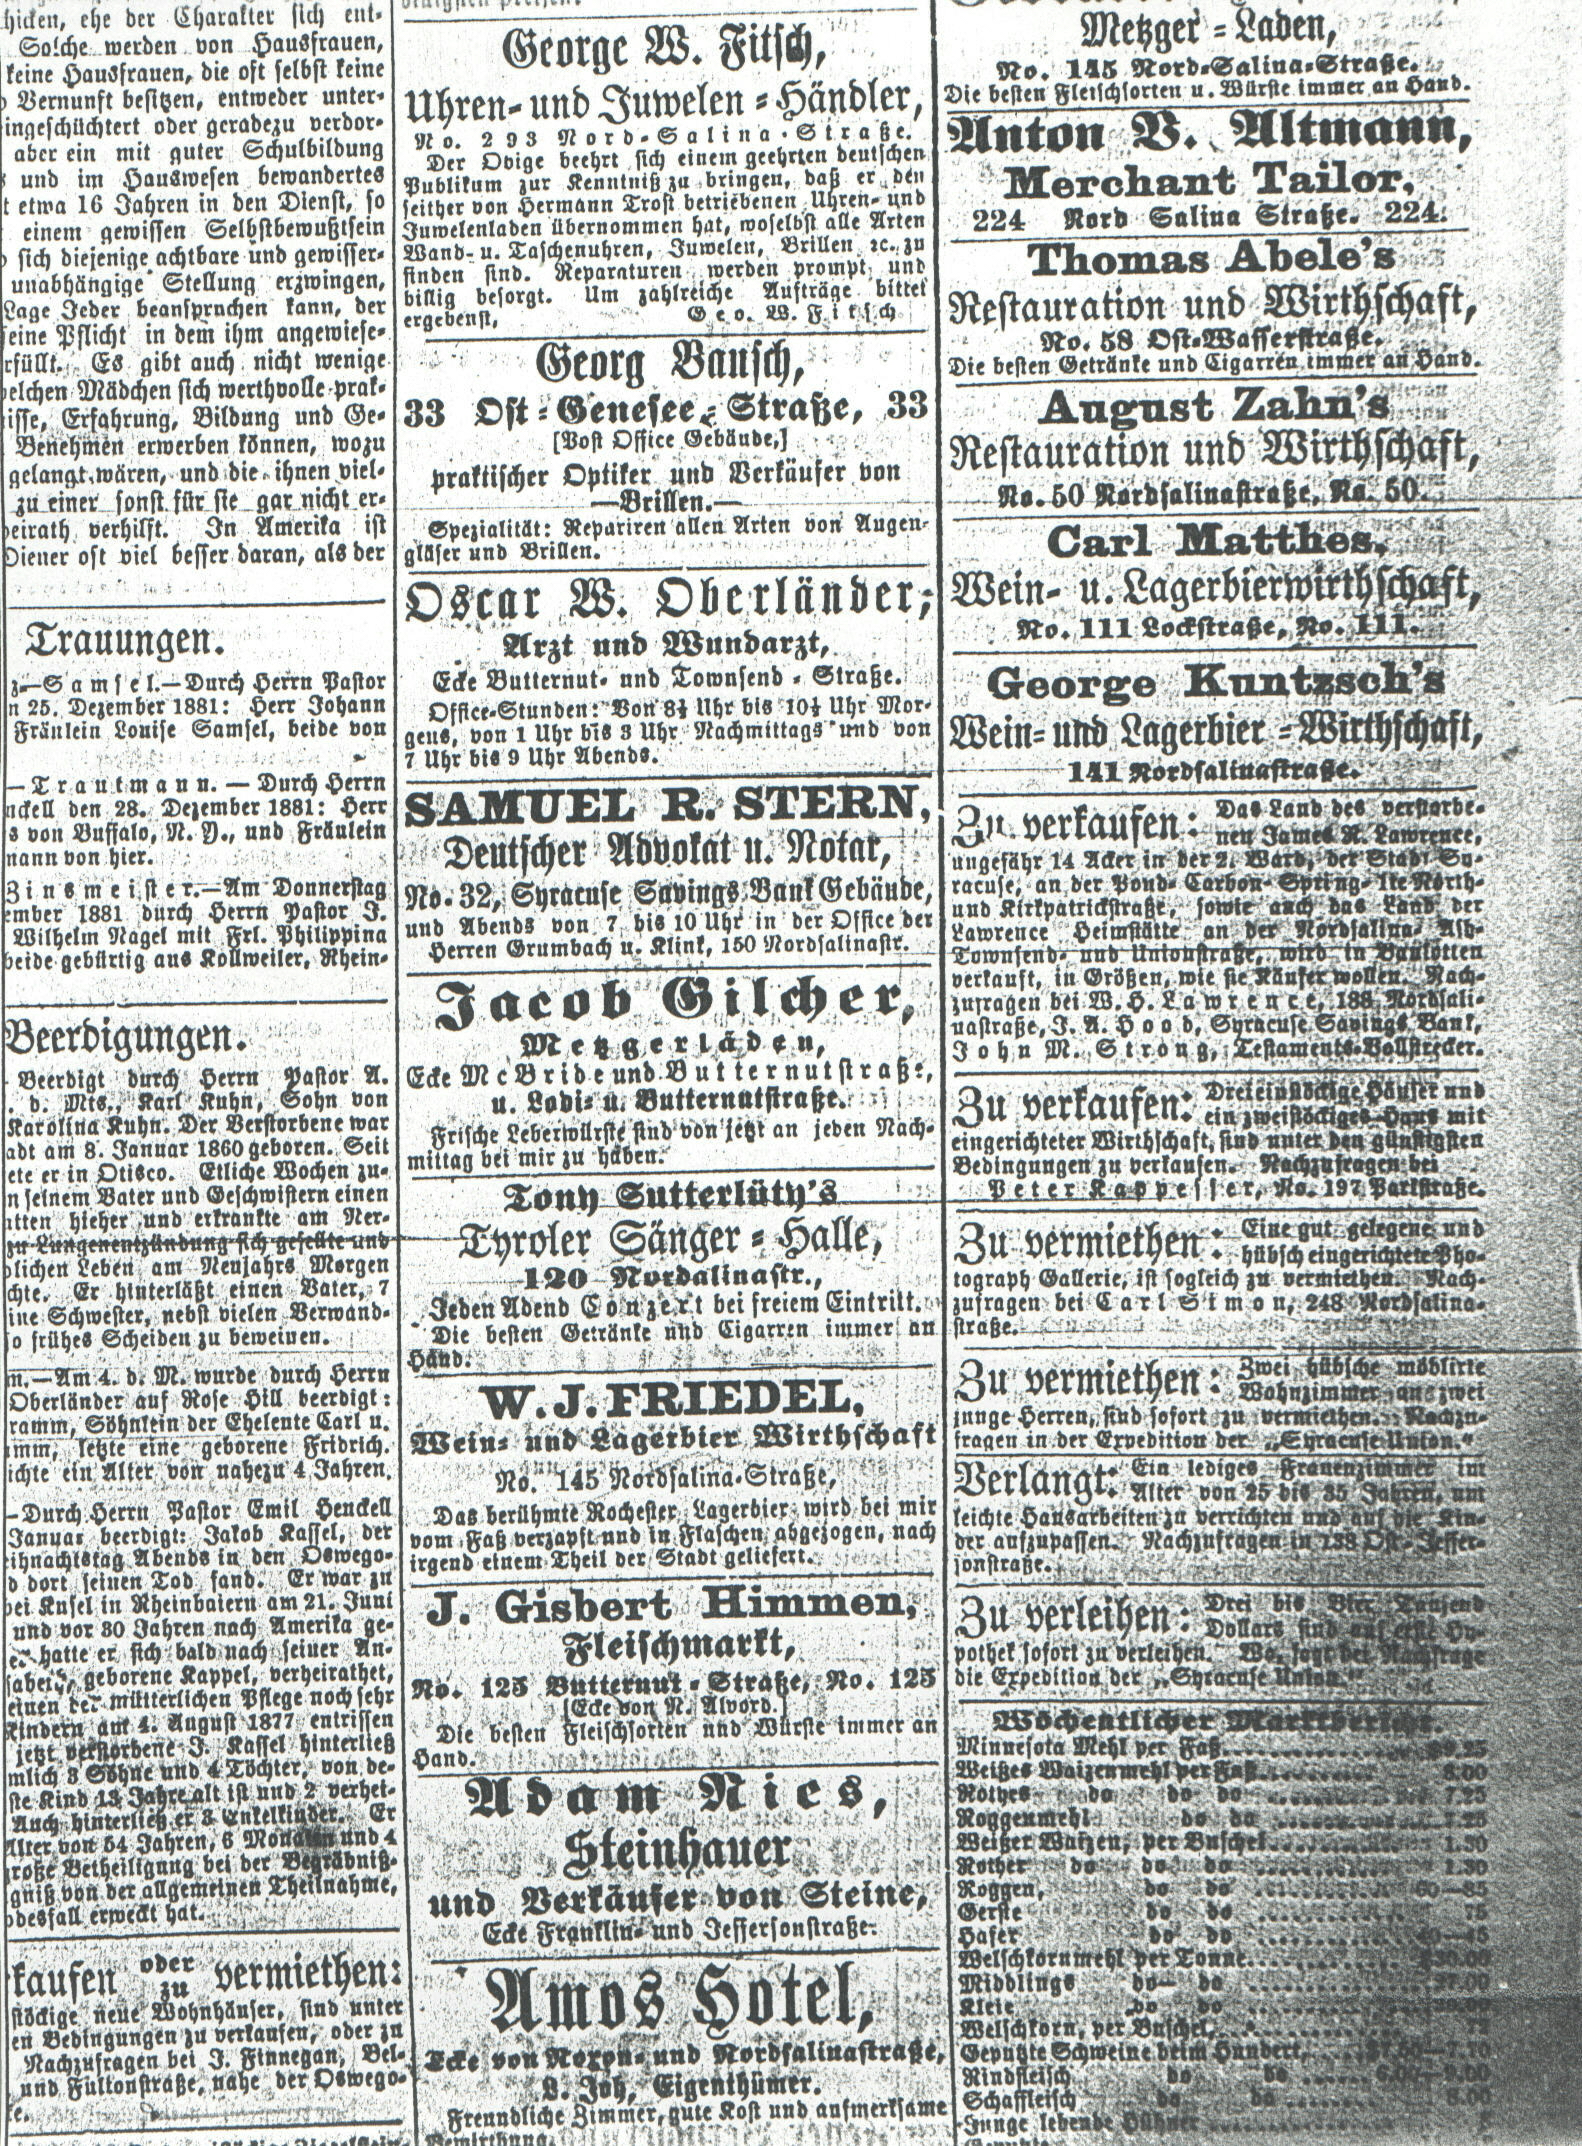 ads from the Syracuse Union, 5 
January 1882